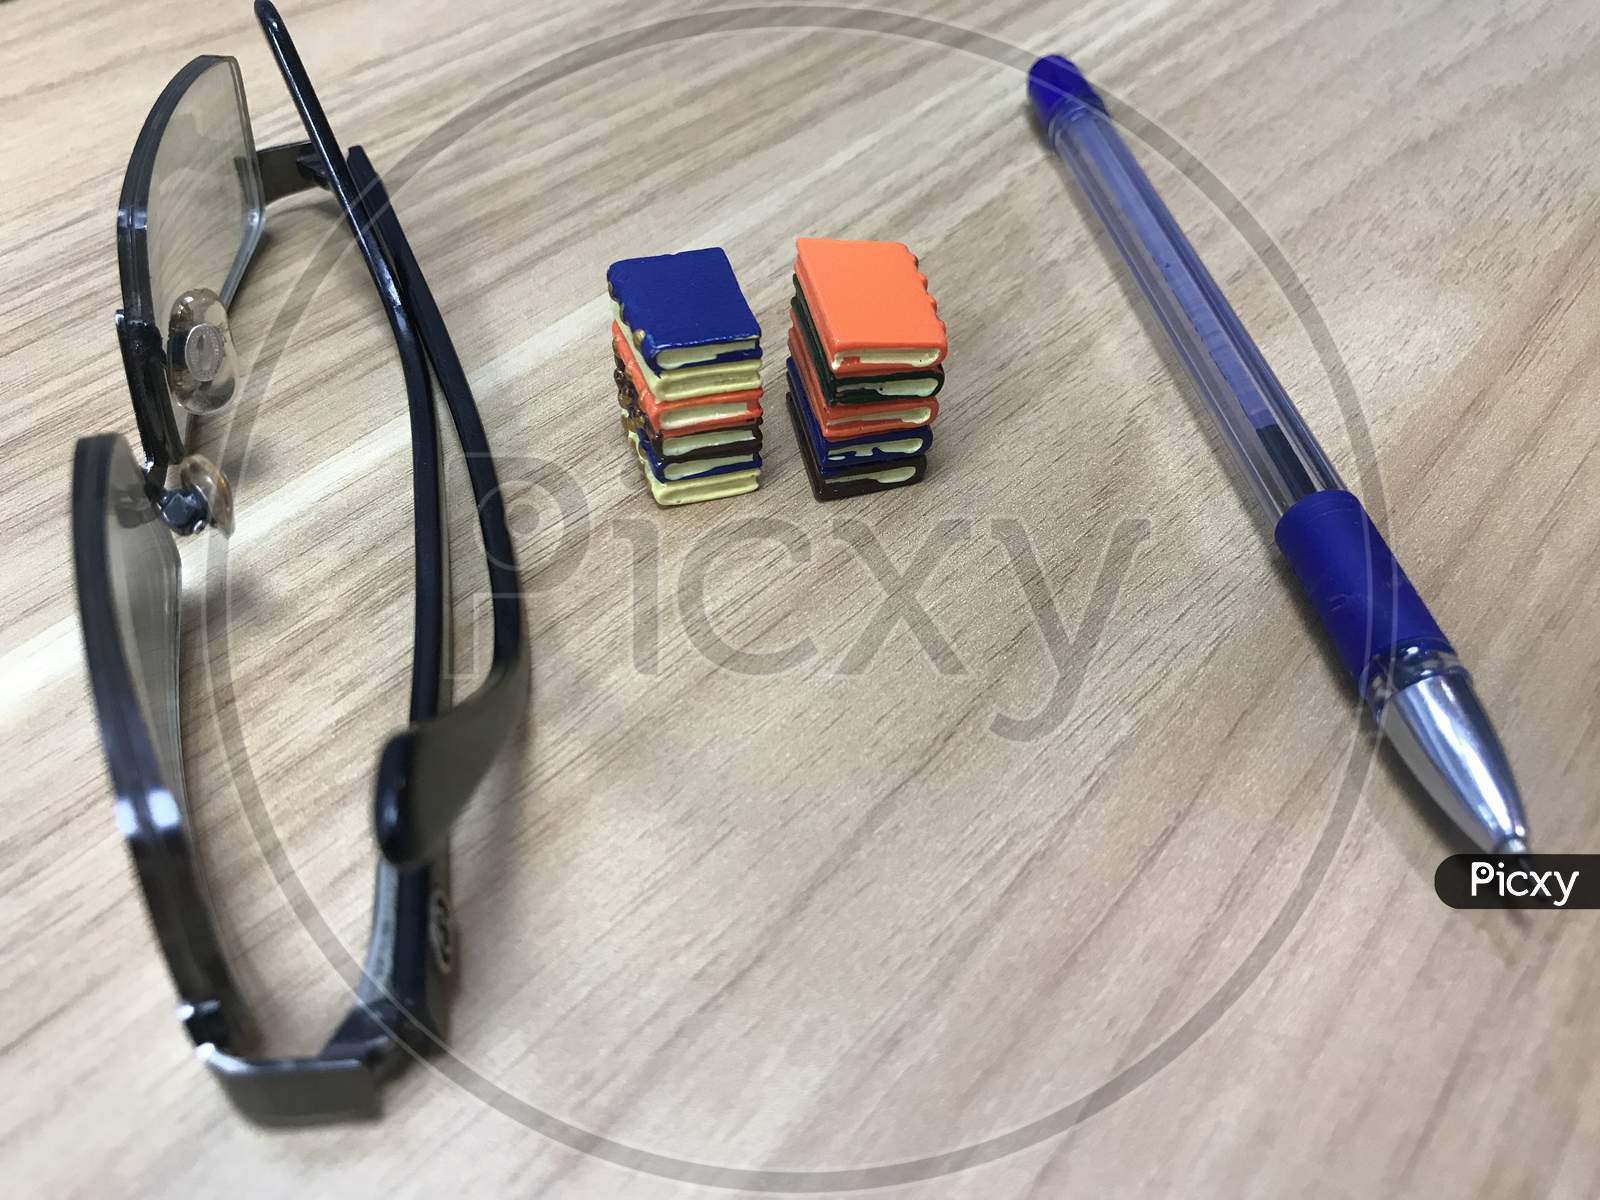 Book Toys And A Pen Representing A Life Of An Writer Who Can Impose His Ideas To People Who Like To Improve Their Literacy Level